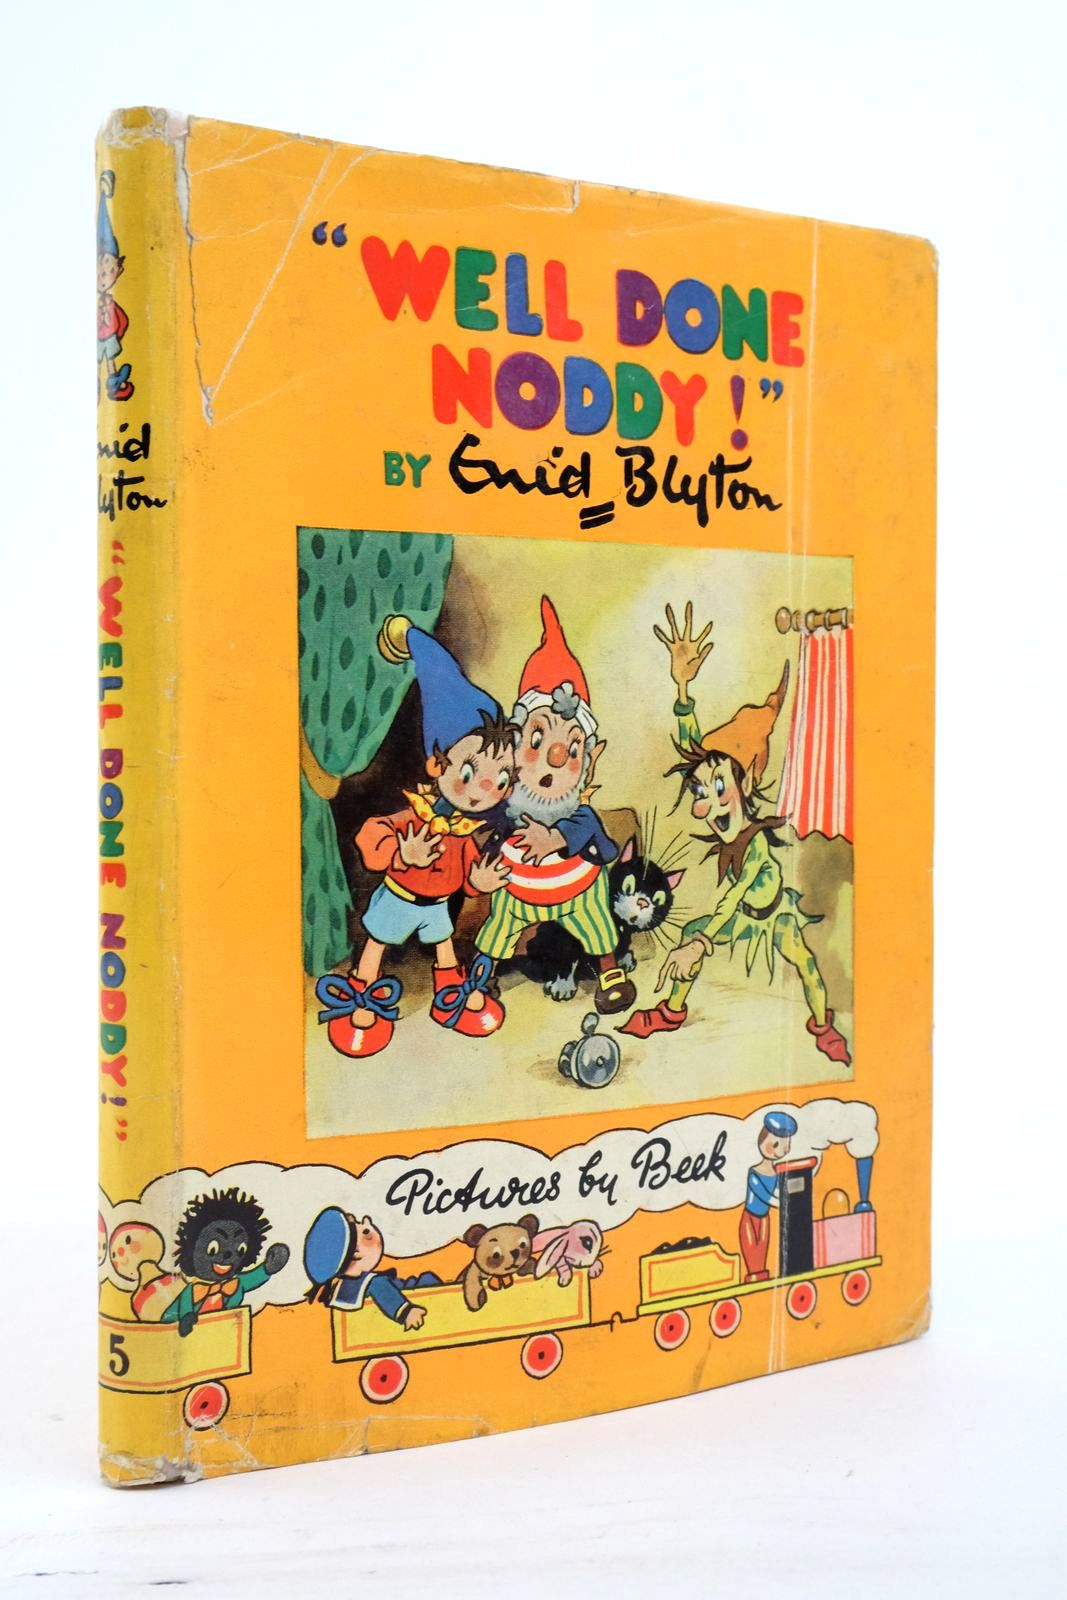 Photo of WELL DONE NODDY! written by Blyton, Enid illustrated by Beek,  published by Sampson Low, Marston & Co. Ltd. (STOCK CODE: 2137471)  for sale by Stella & Rose's Books